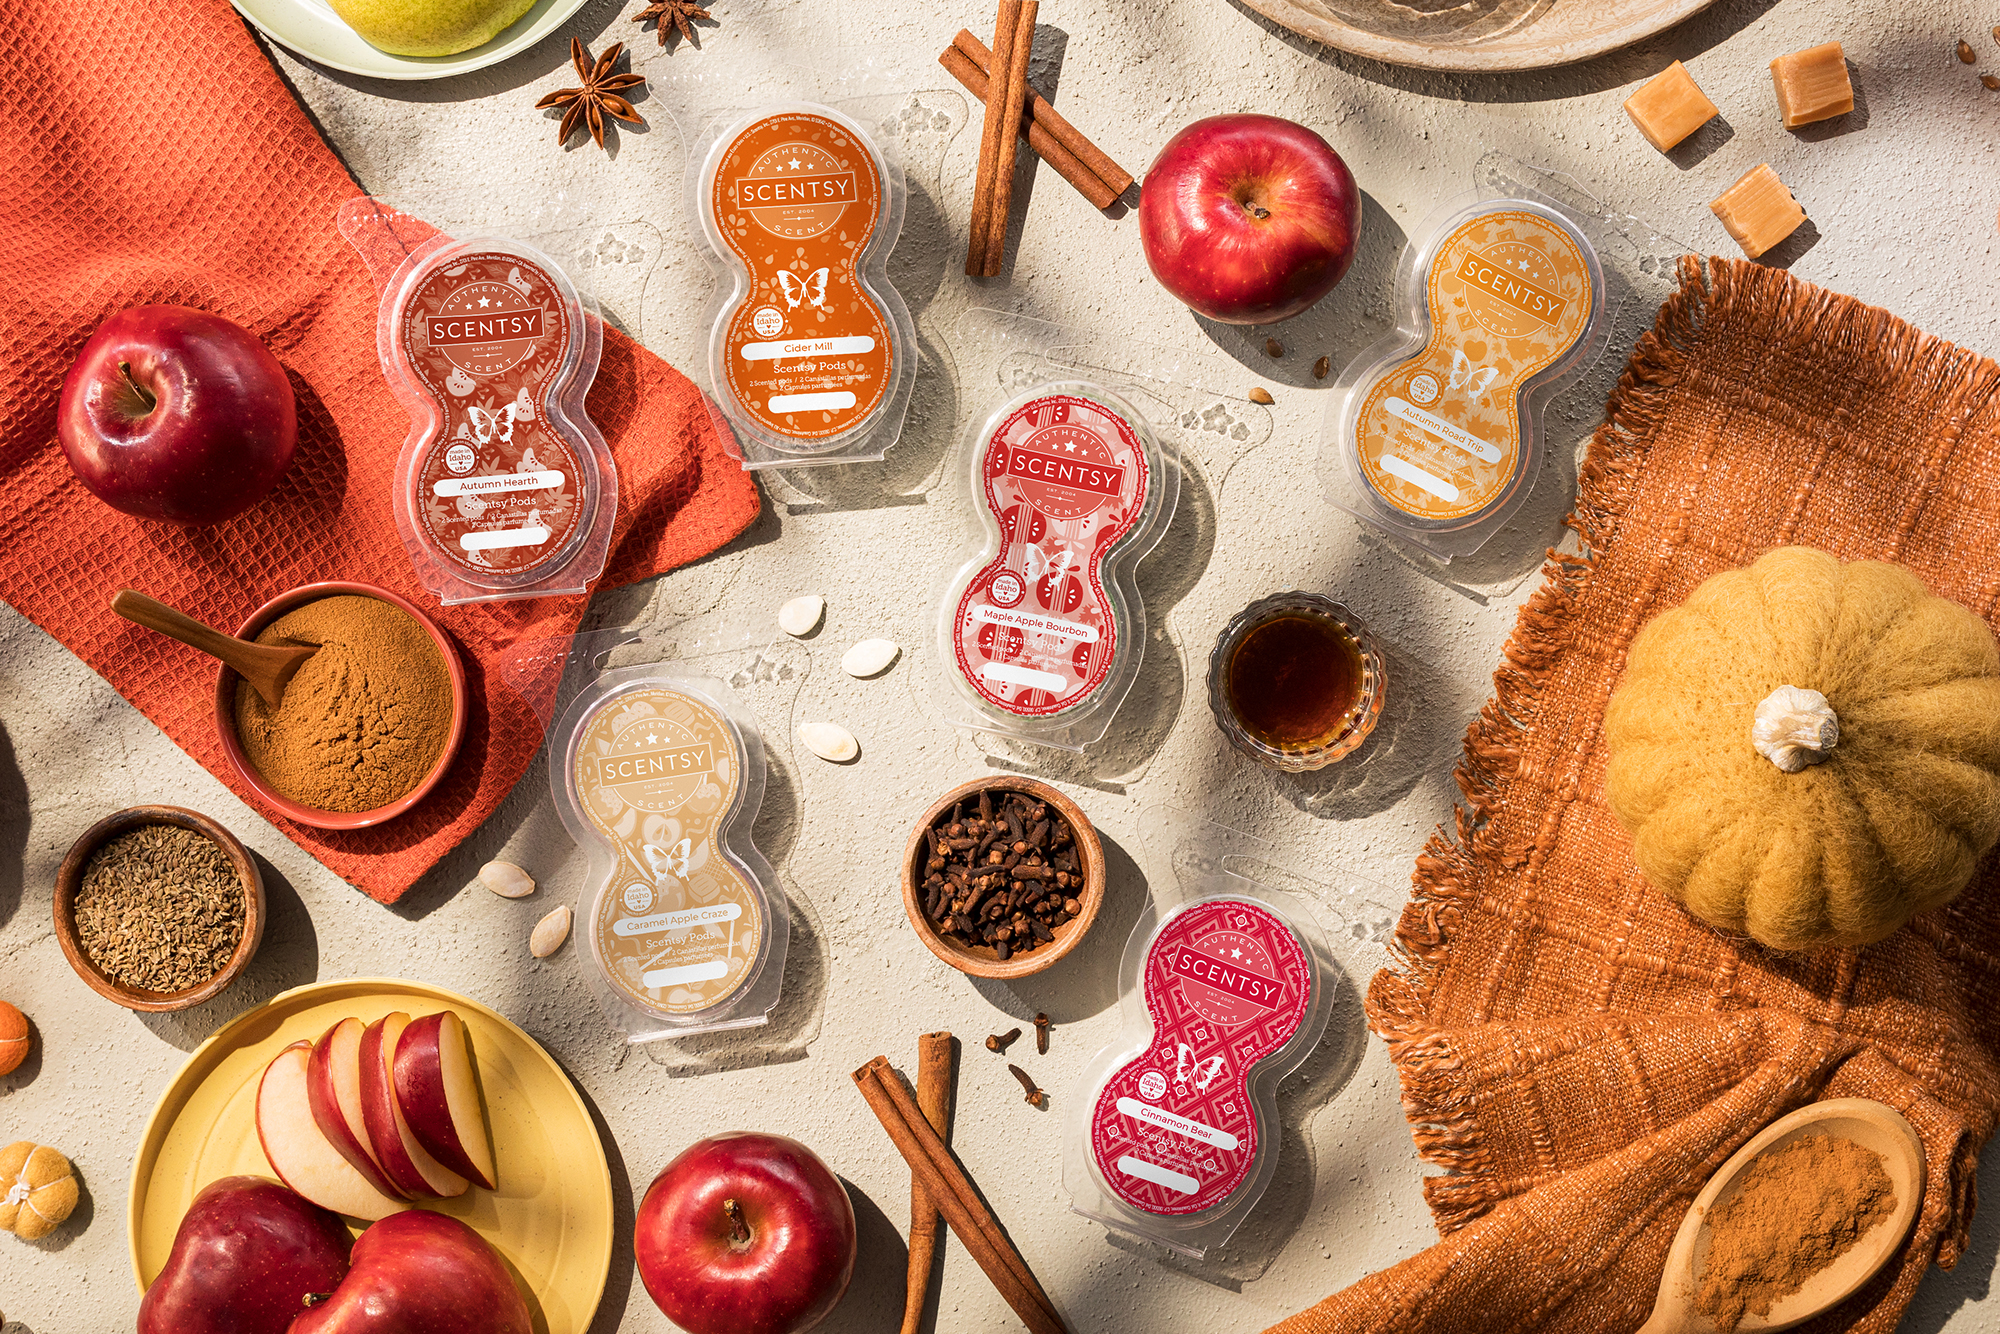 Scentsy's Fall Scented Scentsy Pods